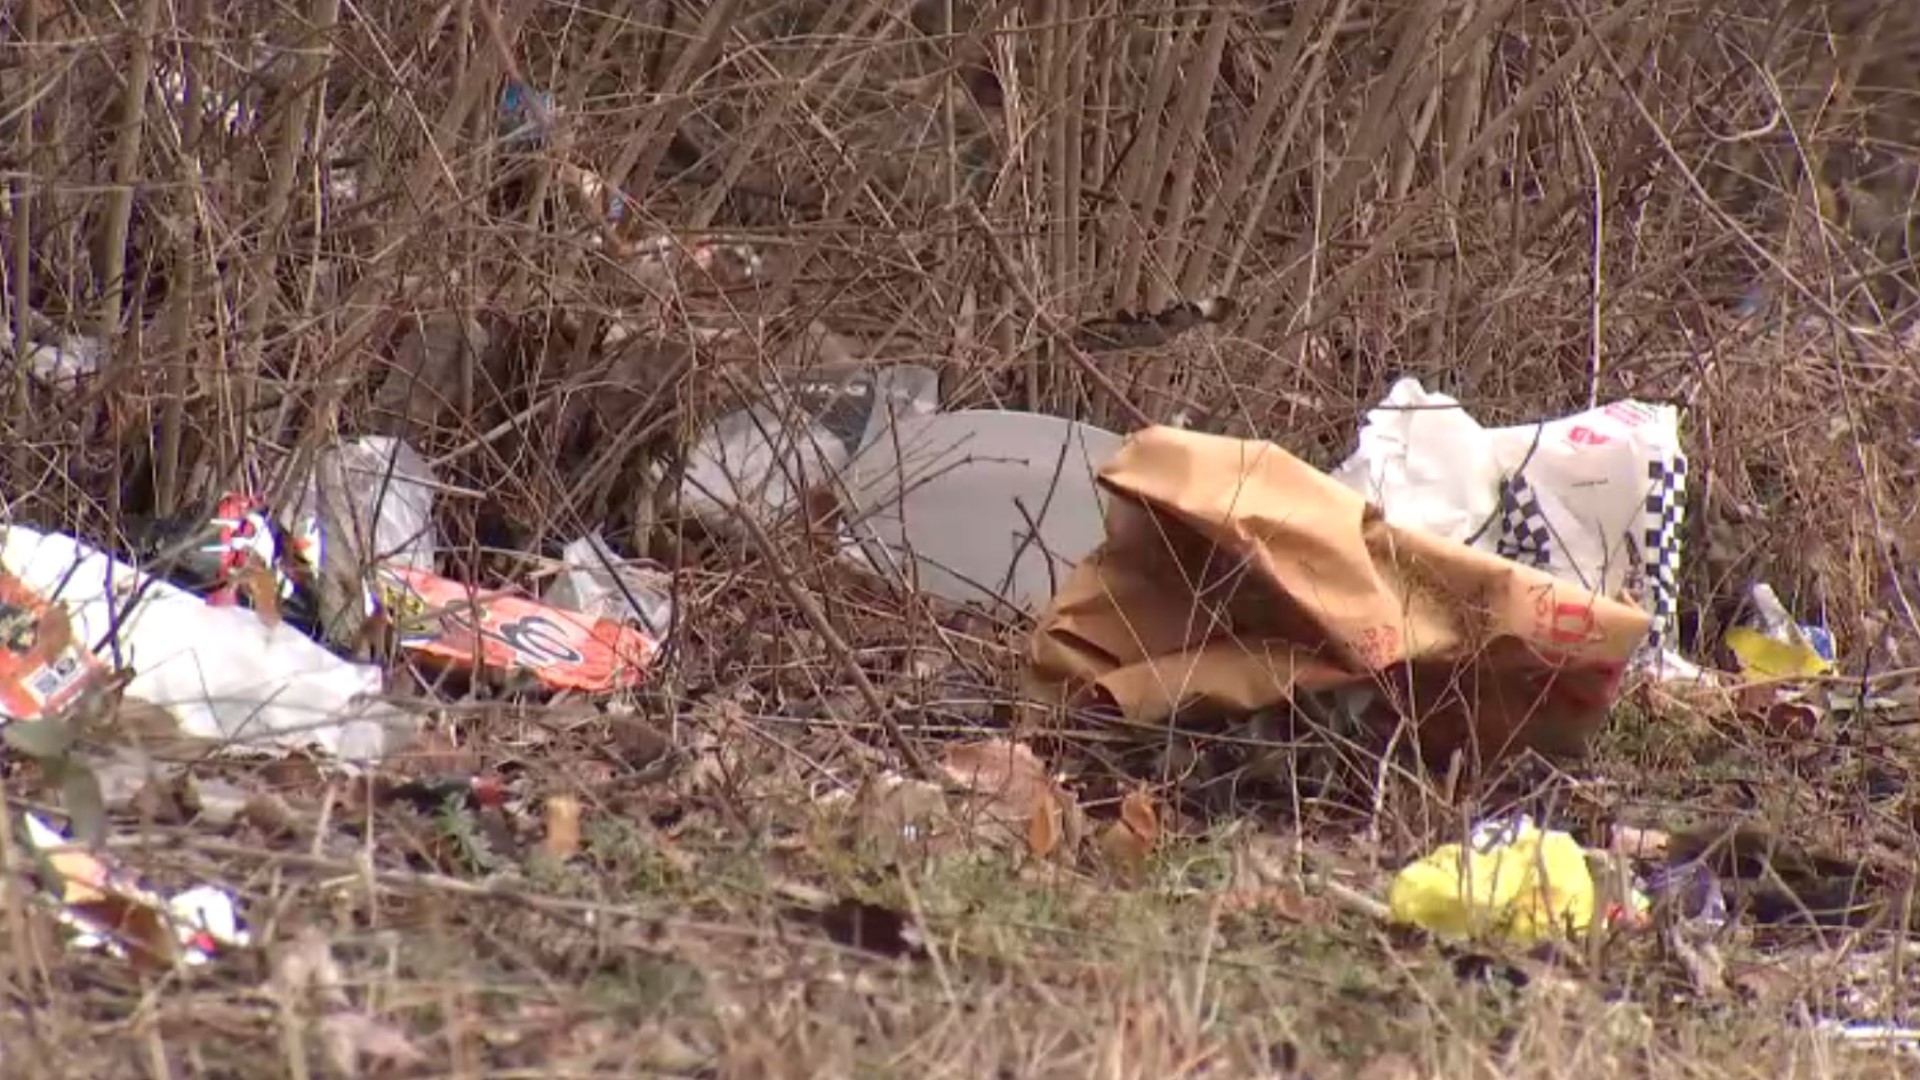 With so many people moving to Charlotte, and the pandemic cutting programs, has Mecklenburg County seen more litter on its roadways?